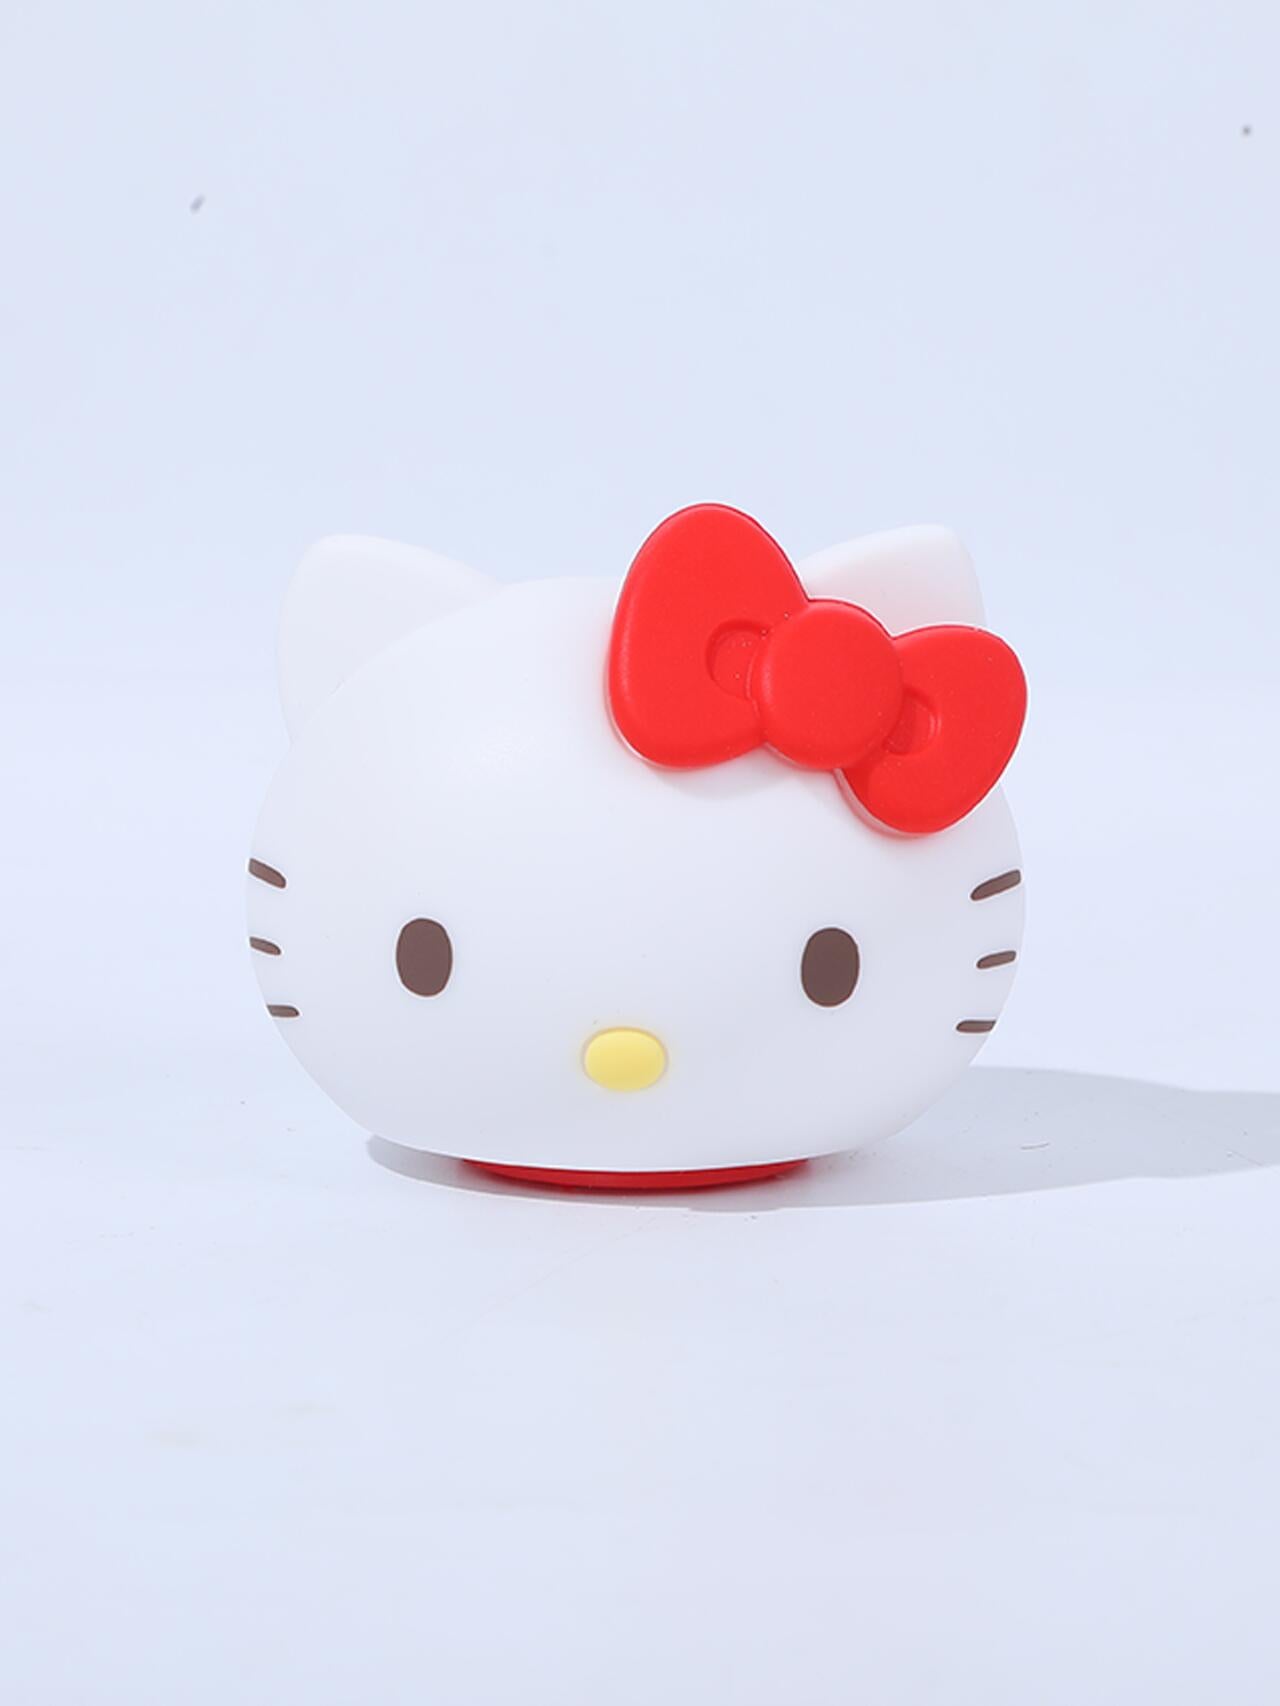 Sanrio Cute Silicone Night Light Lamp for Kids LED Lamp Kids Bedroom Decor as Xmas Birthday Gifts for Boys Girls